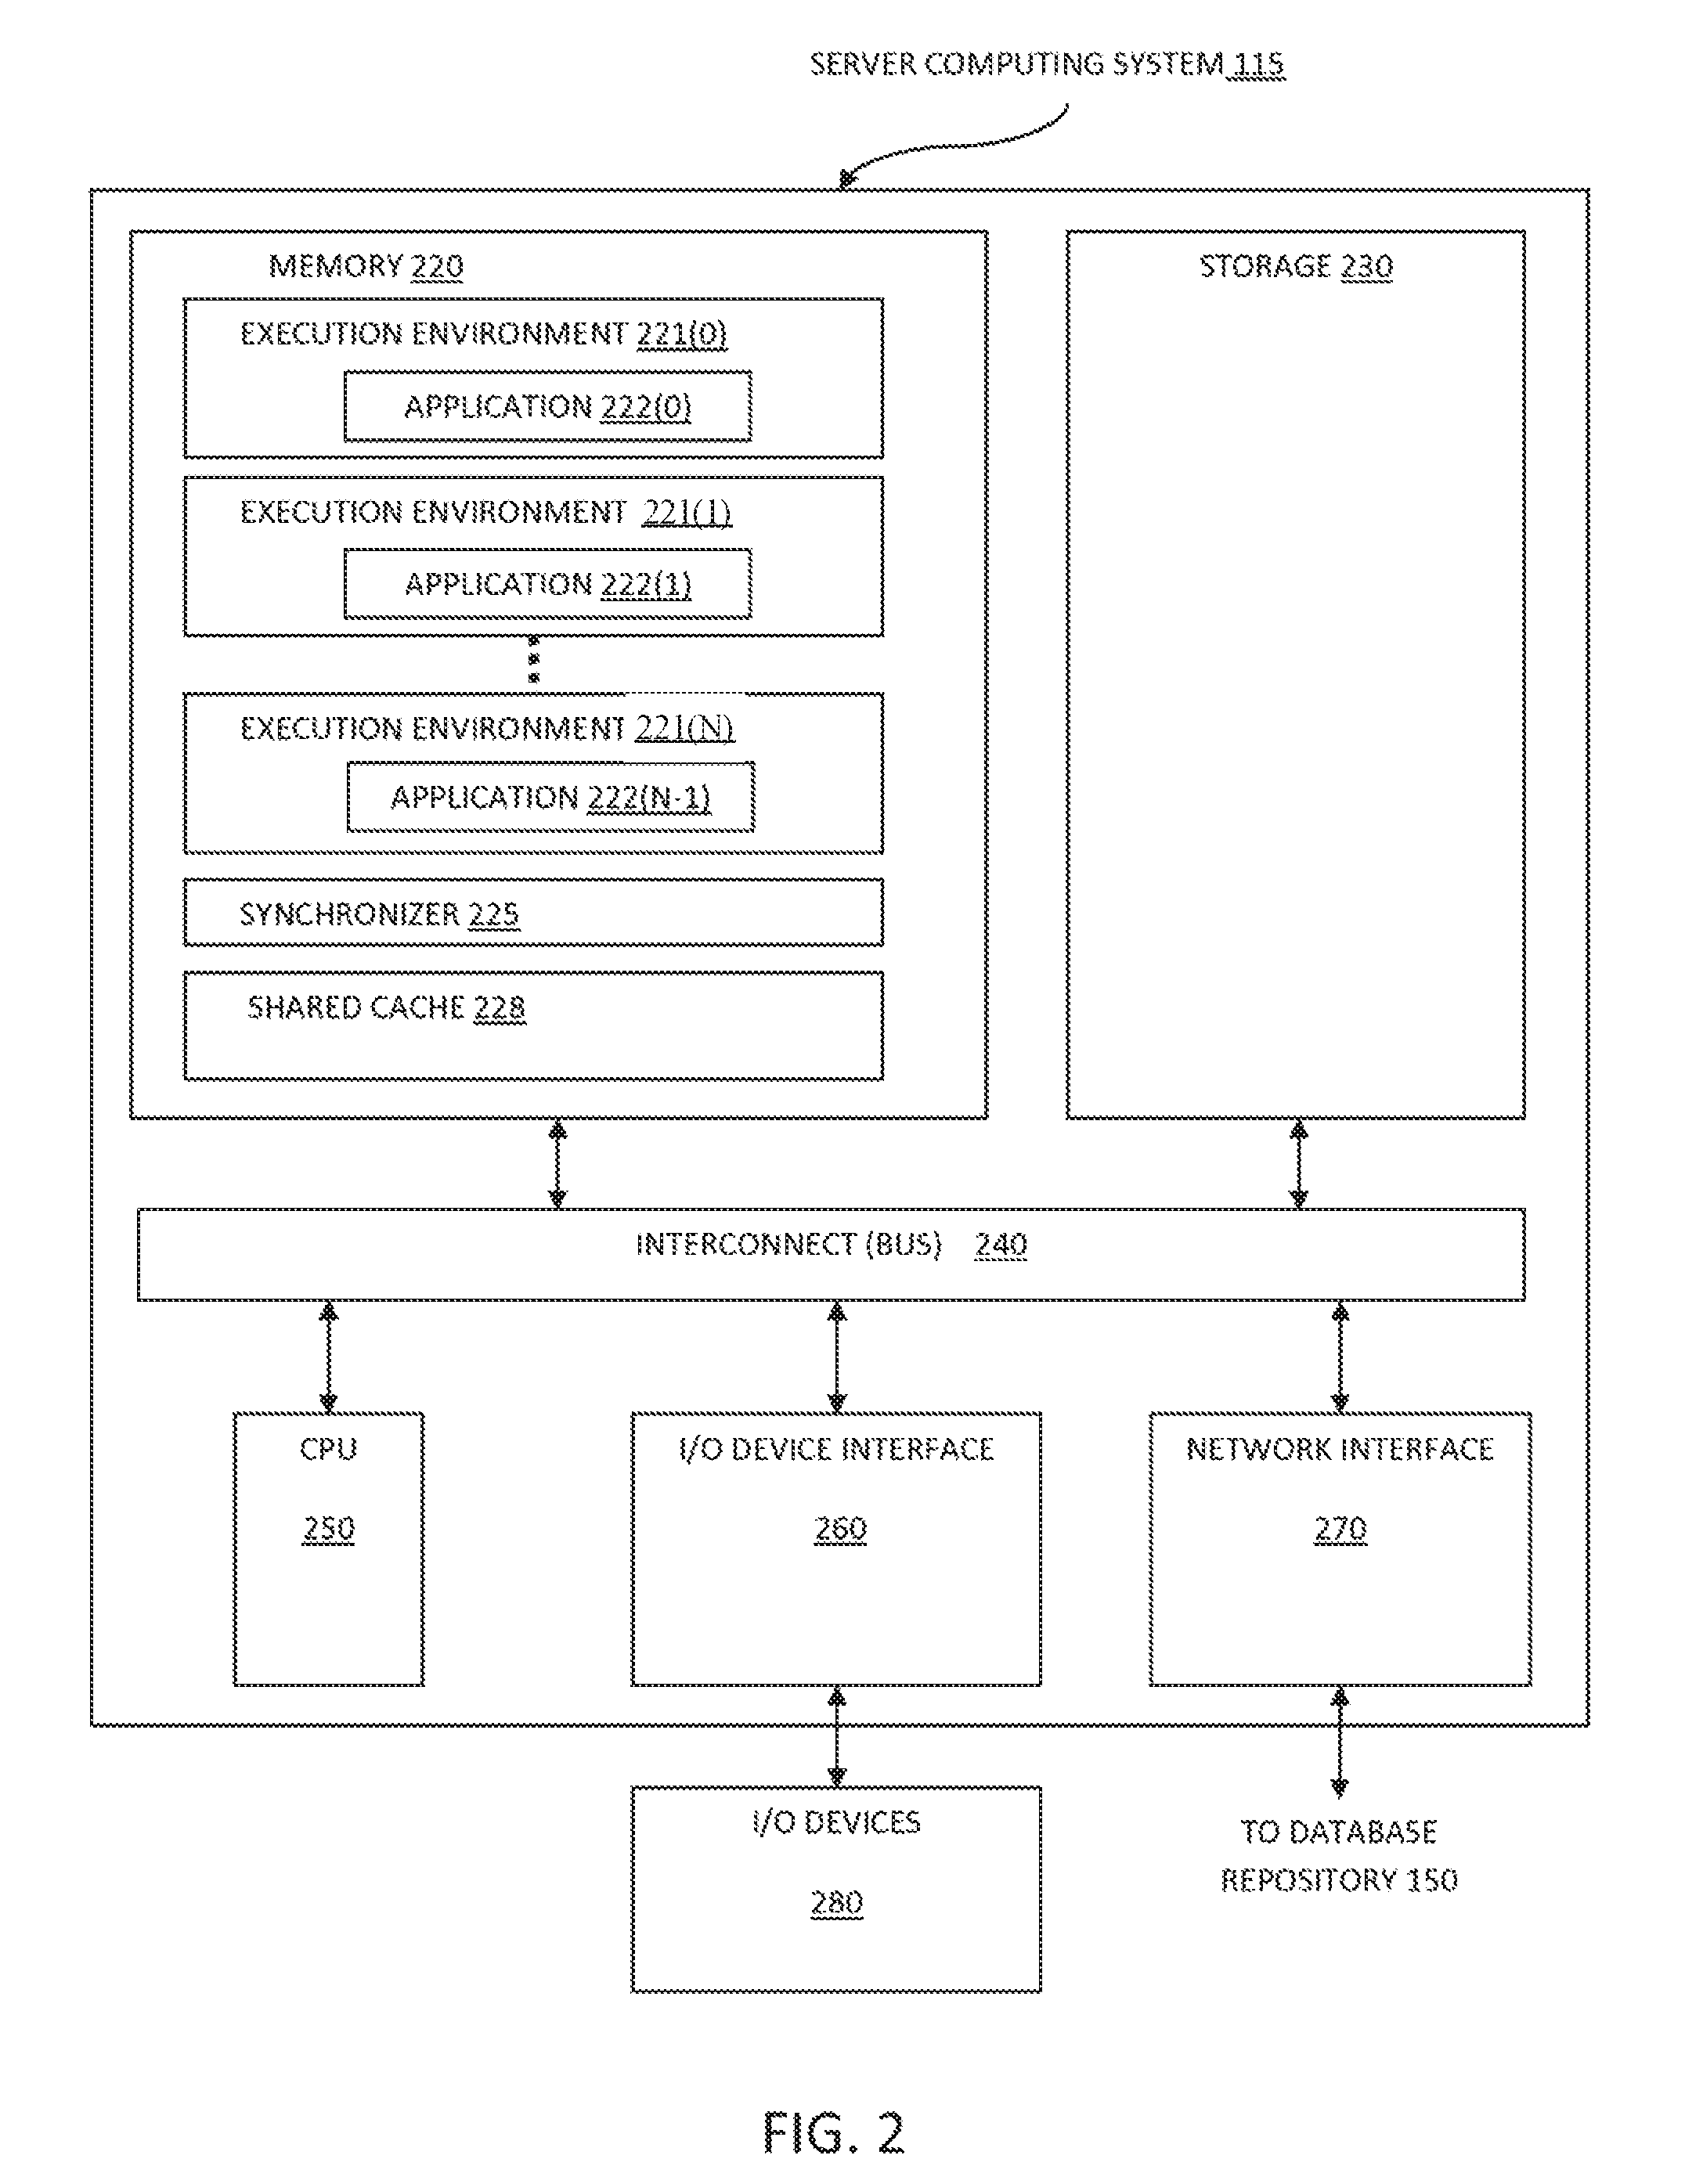 System and method utilizing a shared cache to provide zero copy memory mapped database